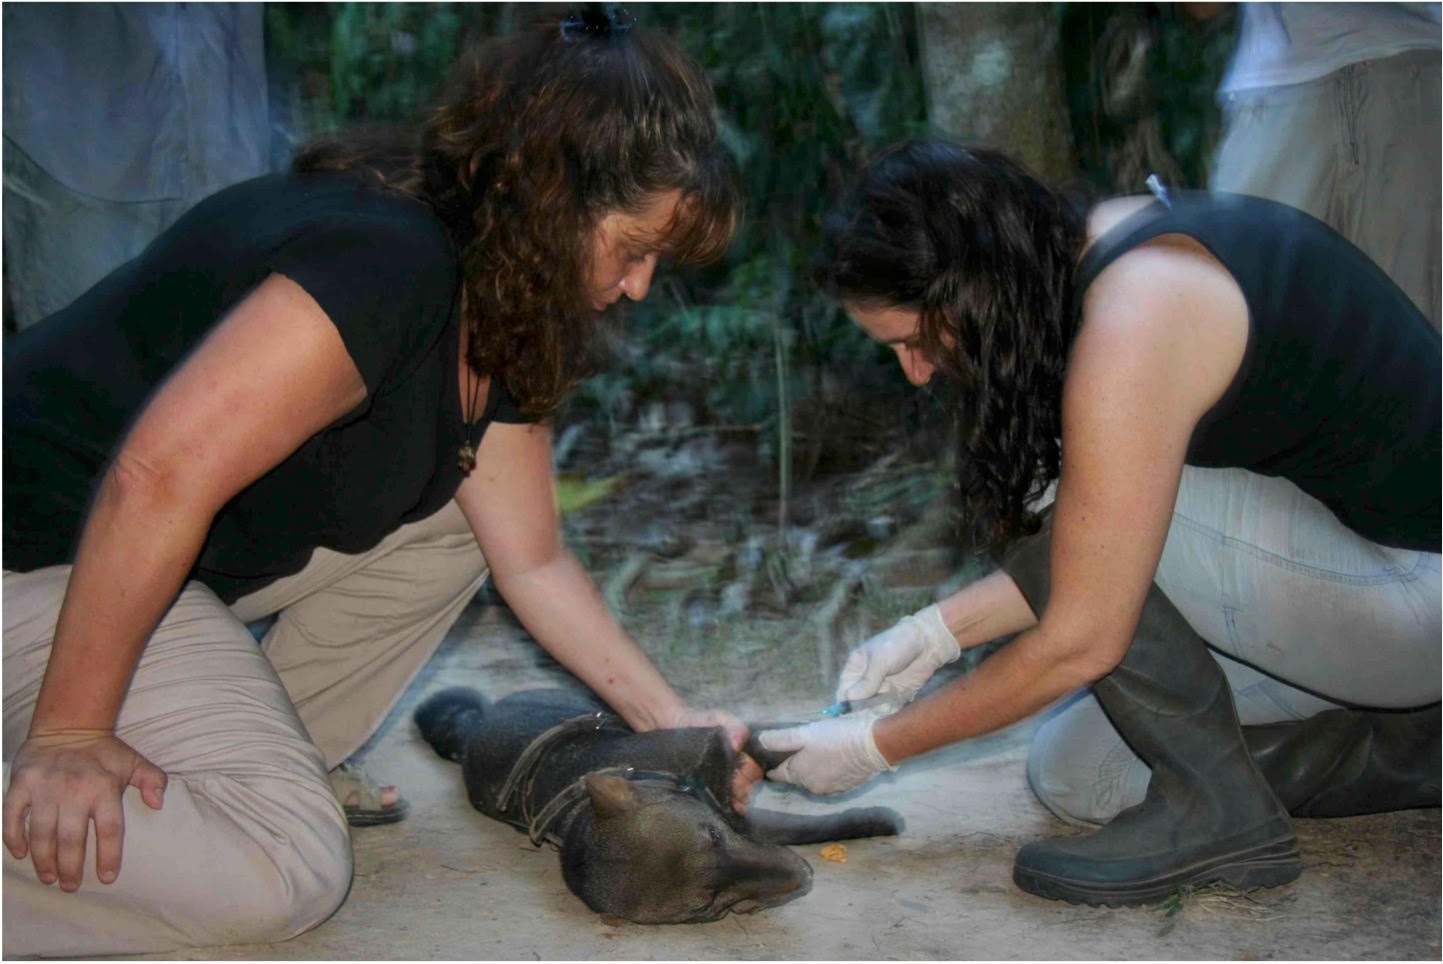 Pitman (right) and her research assistant putting trackers on Oso to send him off into the wild. (Photo: Renata Leite Pitman)